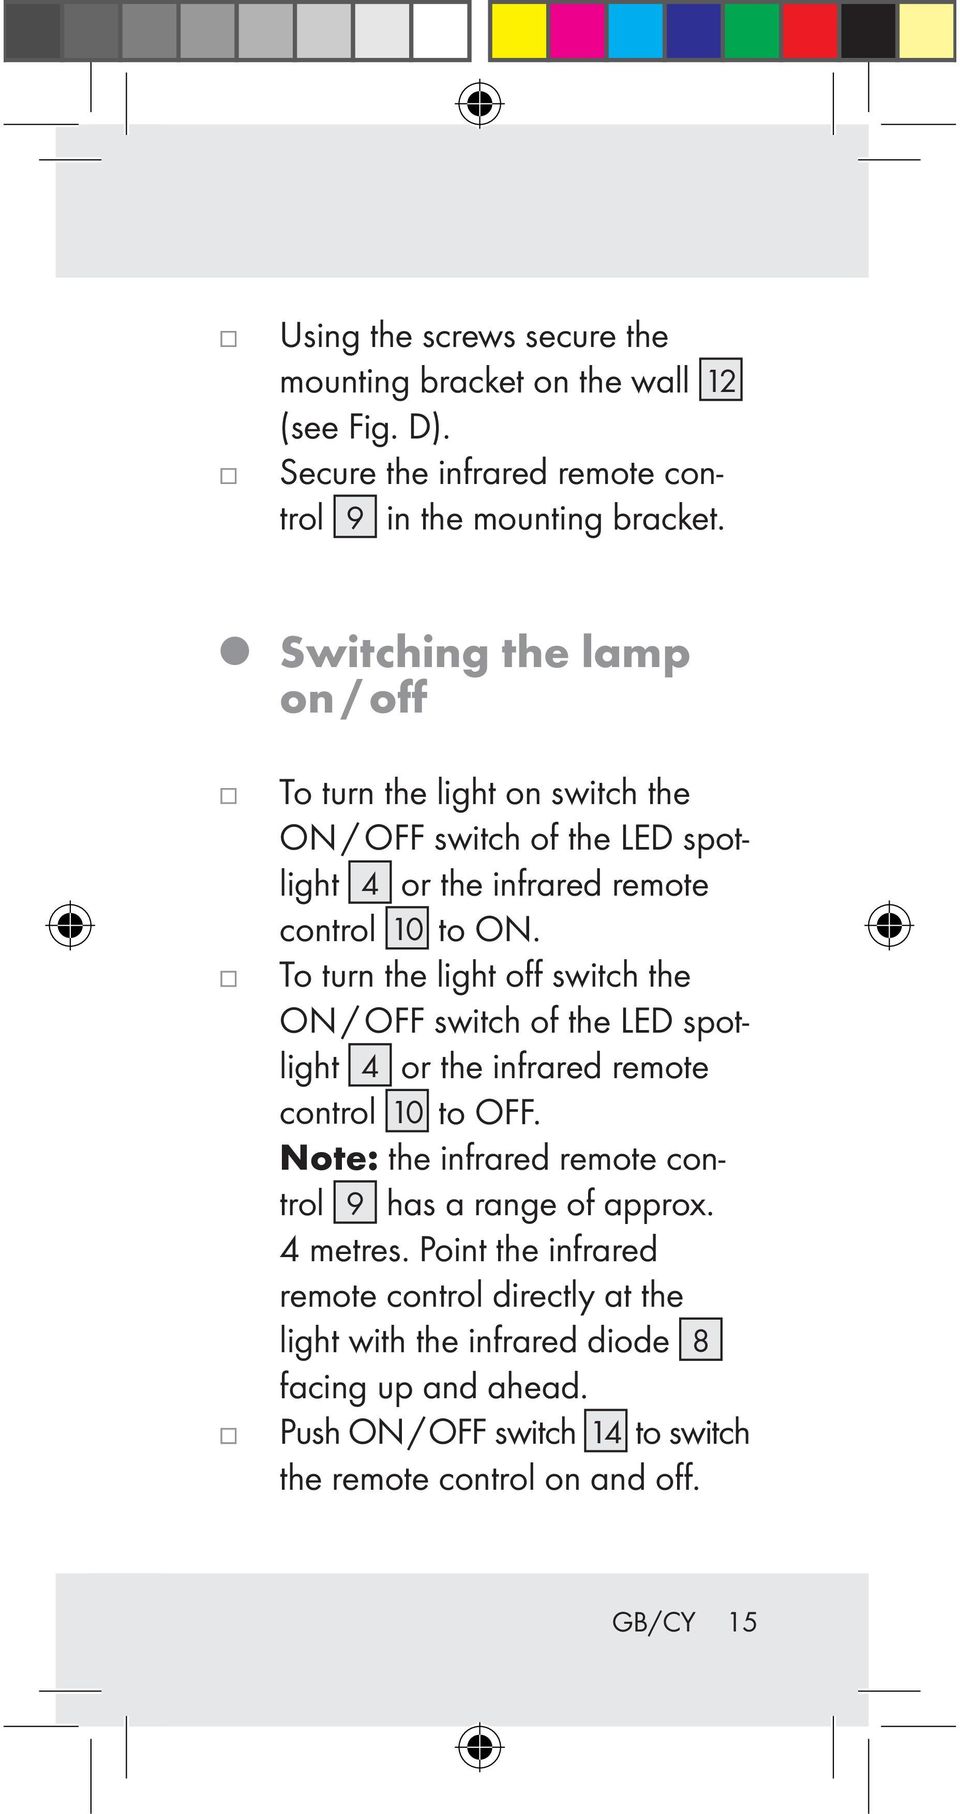 To turn the light off switch the ON / OFF switch of the LED spotlight 4 or the infrared remote control 10 to OFF.